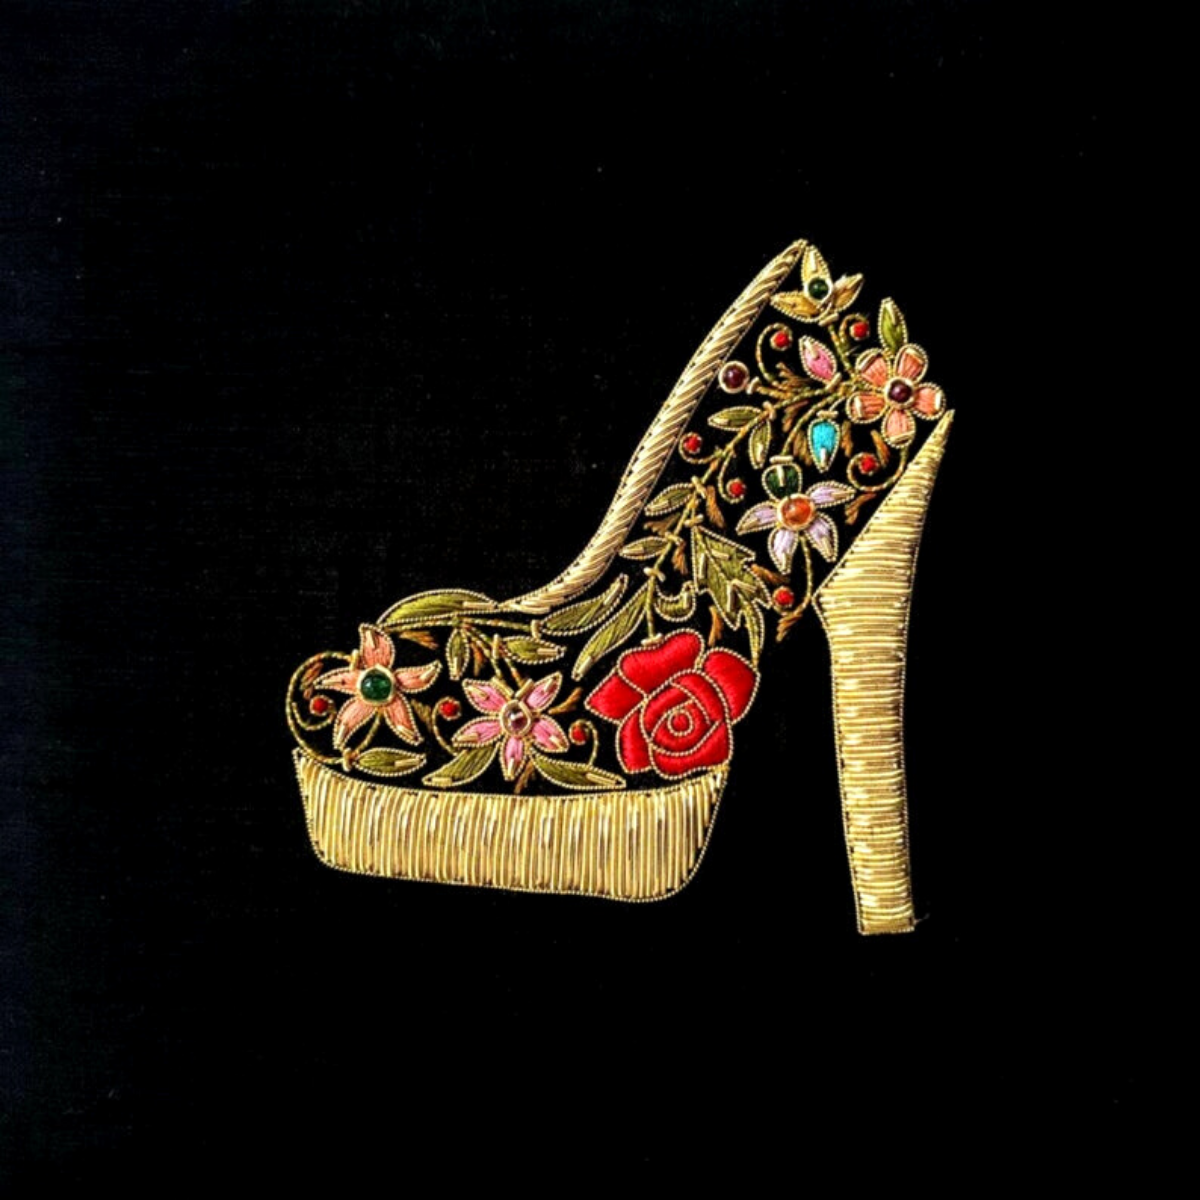 Black silk keepsake box for her embroidered with women's fashion shoe in floral design and gold, zardozi box. 